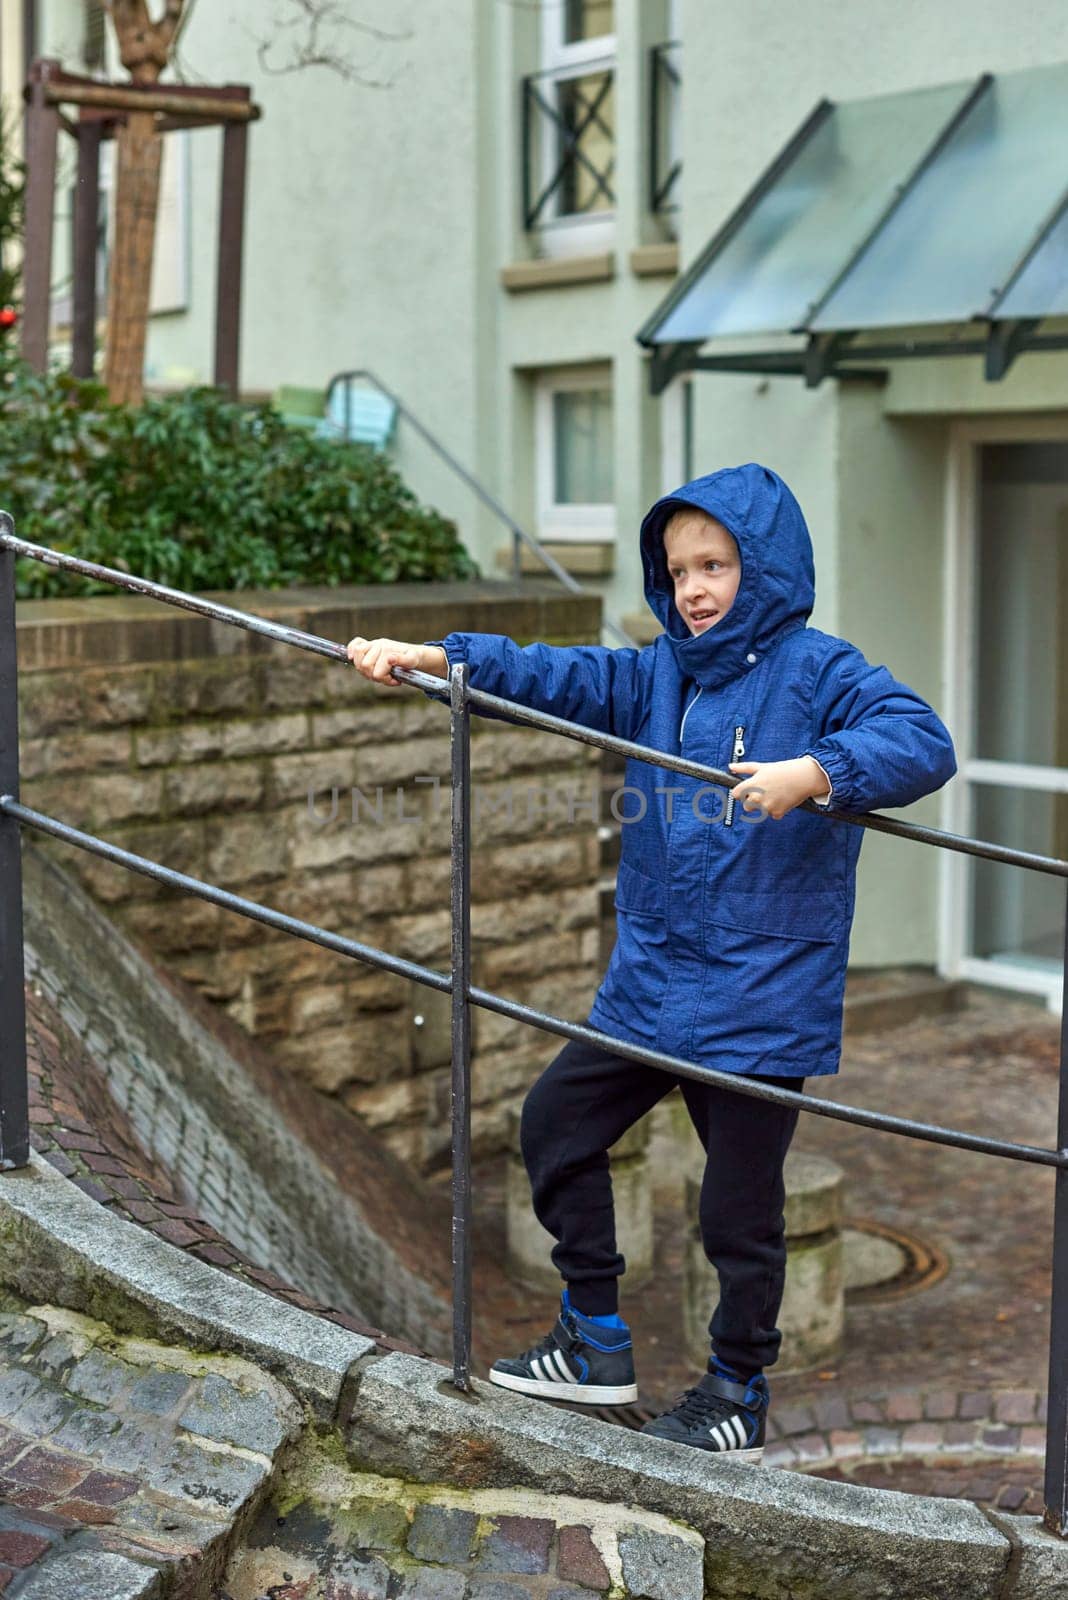 Joyful Boy in Blue Winter Jacket on Outdoor Stairs with City Buildings in the Background, Autumn or Winter. Experience the delight of the season with this heartwarming image featuring a cheerful 8-year-old boy wearing a blue winter jacket and hood, standing on an outdoor staircase, holding onto the railing. The photograph captures the vibrant spirit of autumn or the serene beauty of winter against the backdrop of city buildings.